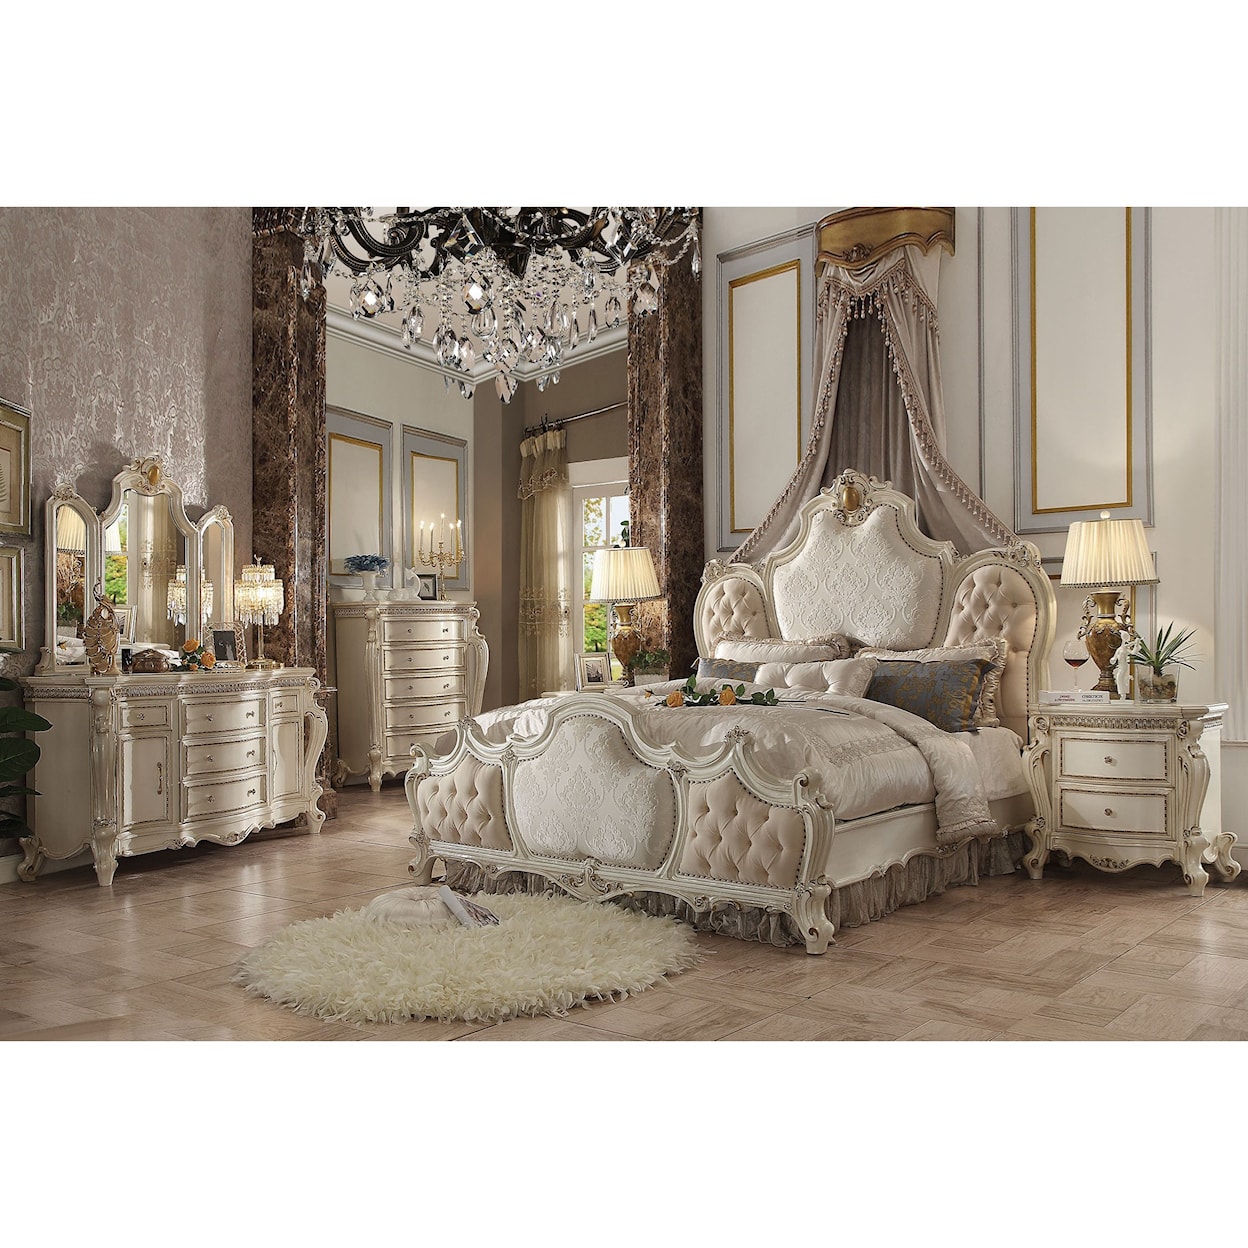 Acme Furniture Picardy California King Bedroom Group